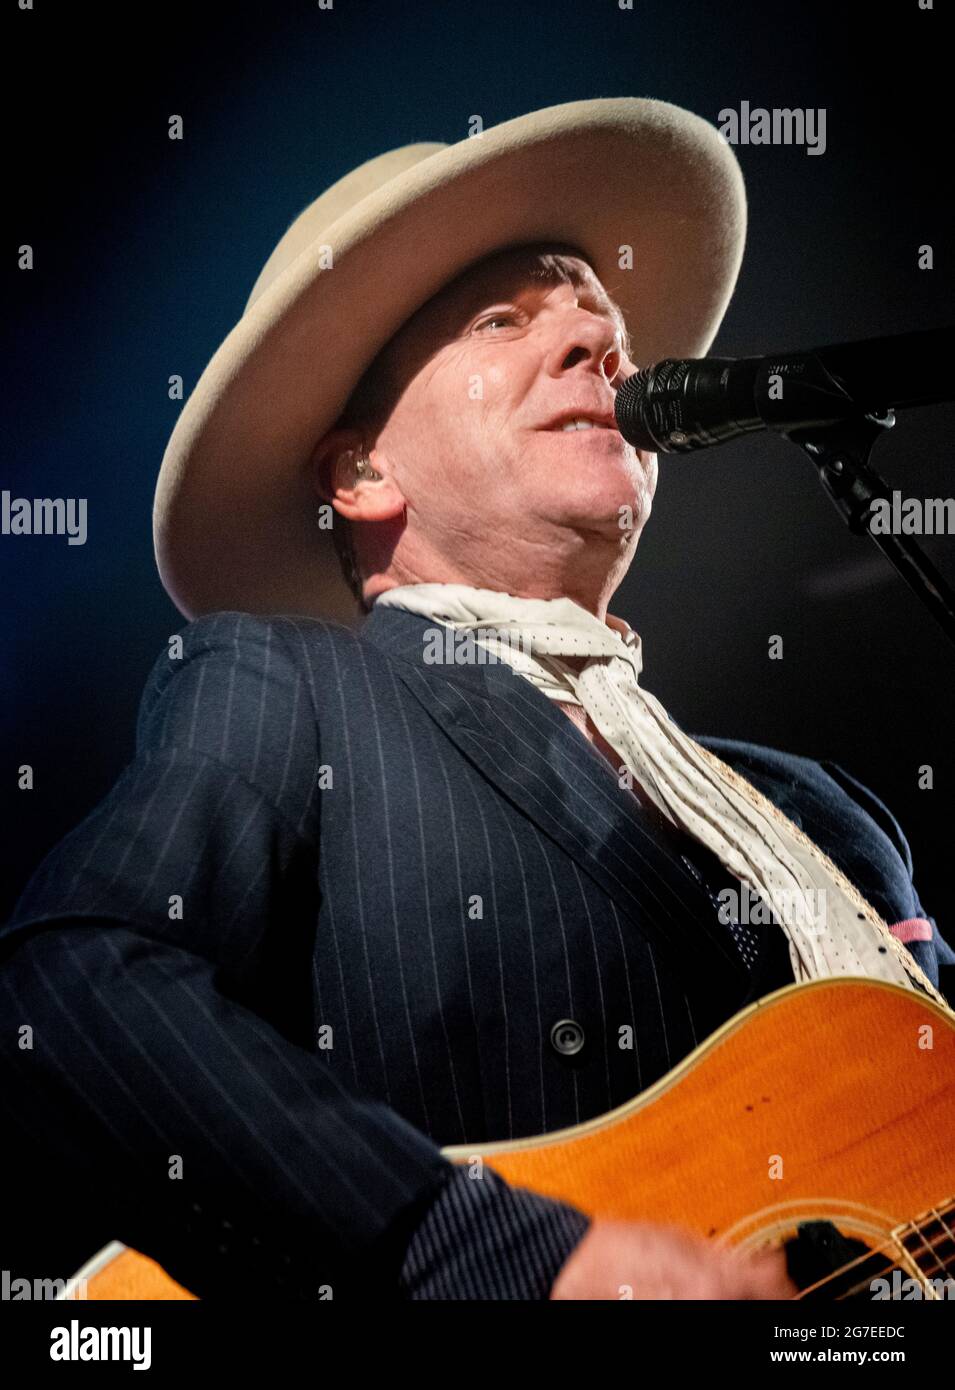 British-born Canadian actor, best known as Jack Bauer from 24; Kiefer Sutherland plays songs from his latest album “Reckless & Me” lie in concert Stock Photo